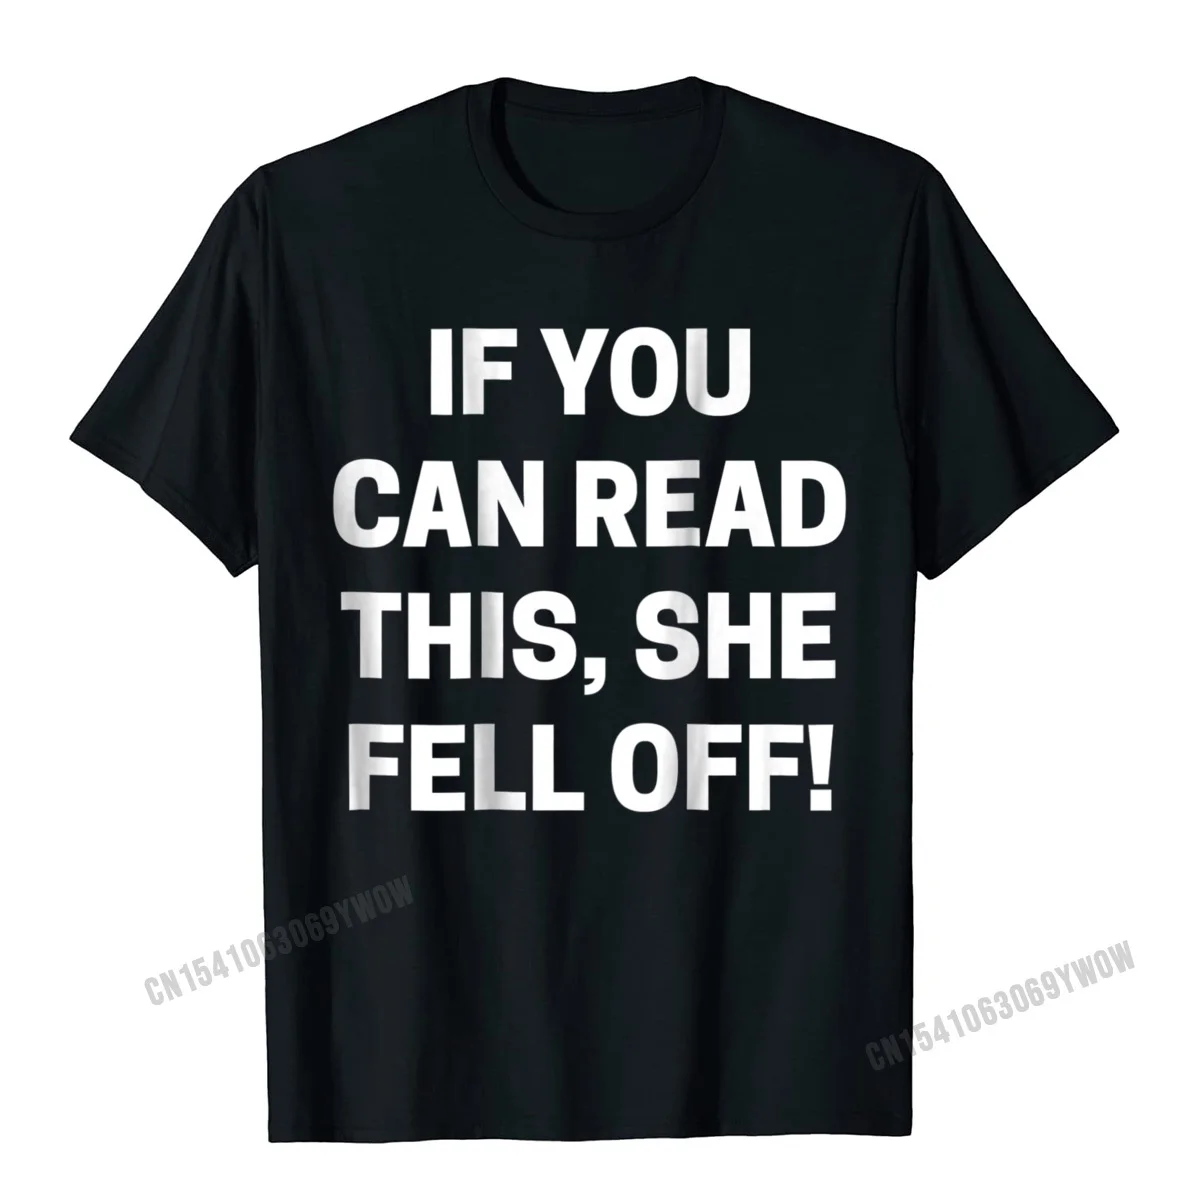 

If You Can Read This She Fell Off T-Shirt Funny Motorcycle Camisas Men Faddish Mens Top T-Shirts Geek Tops Shirts Cotton Printed